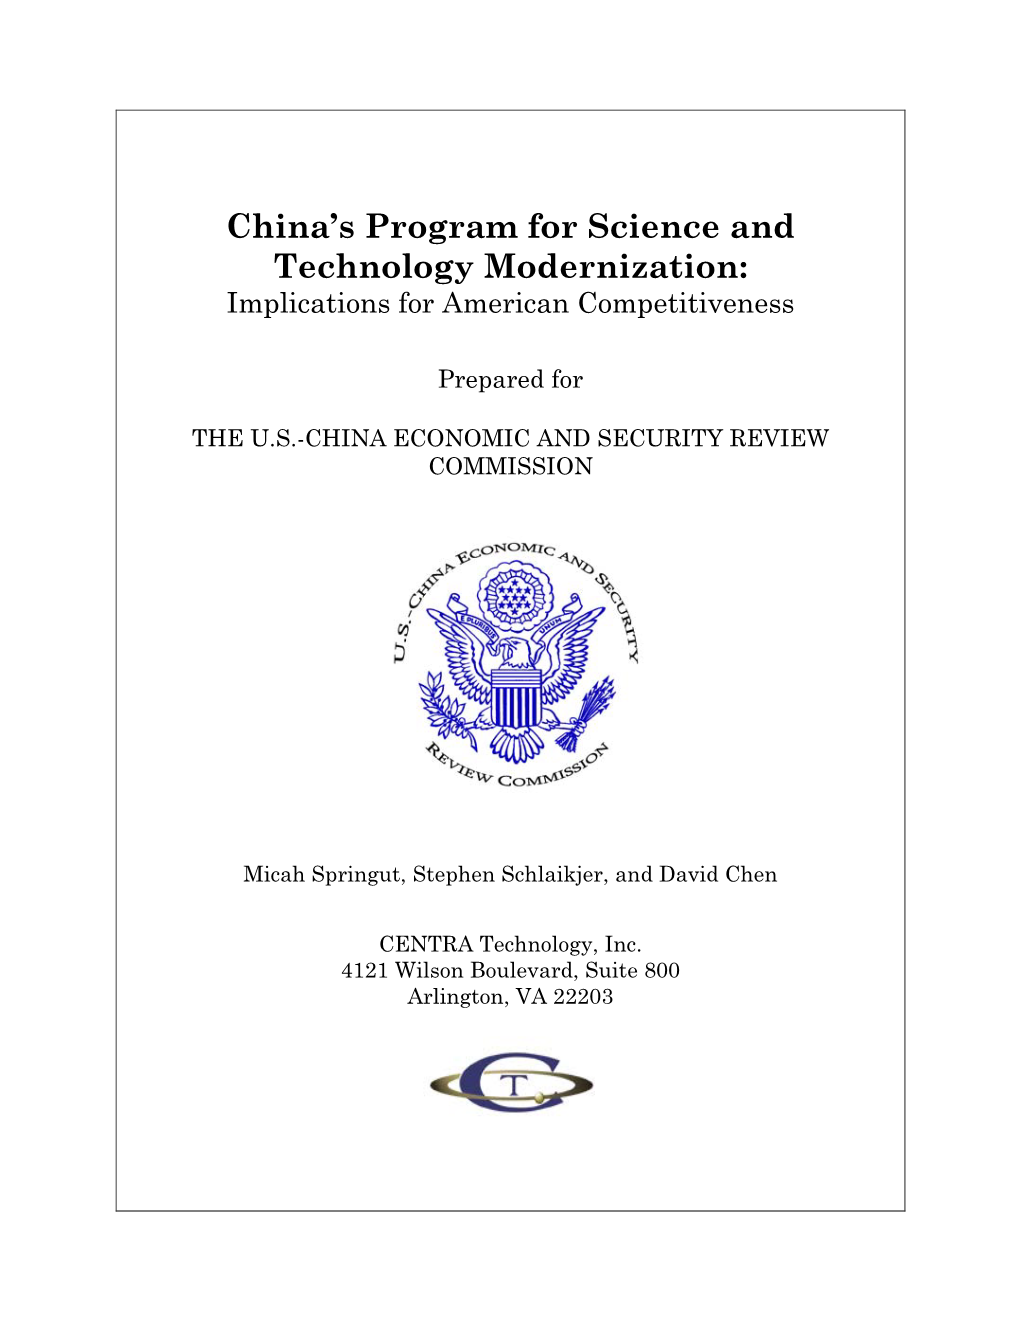 Prepared for the U.S.-China Economic and Security Review Commission